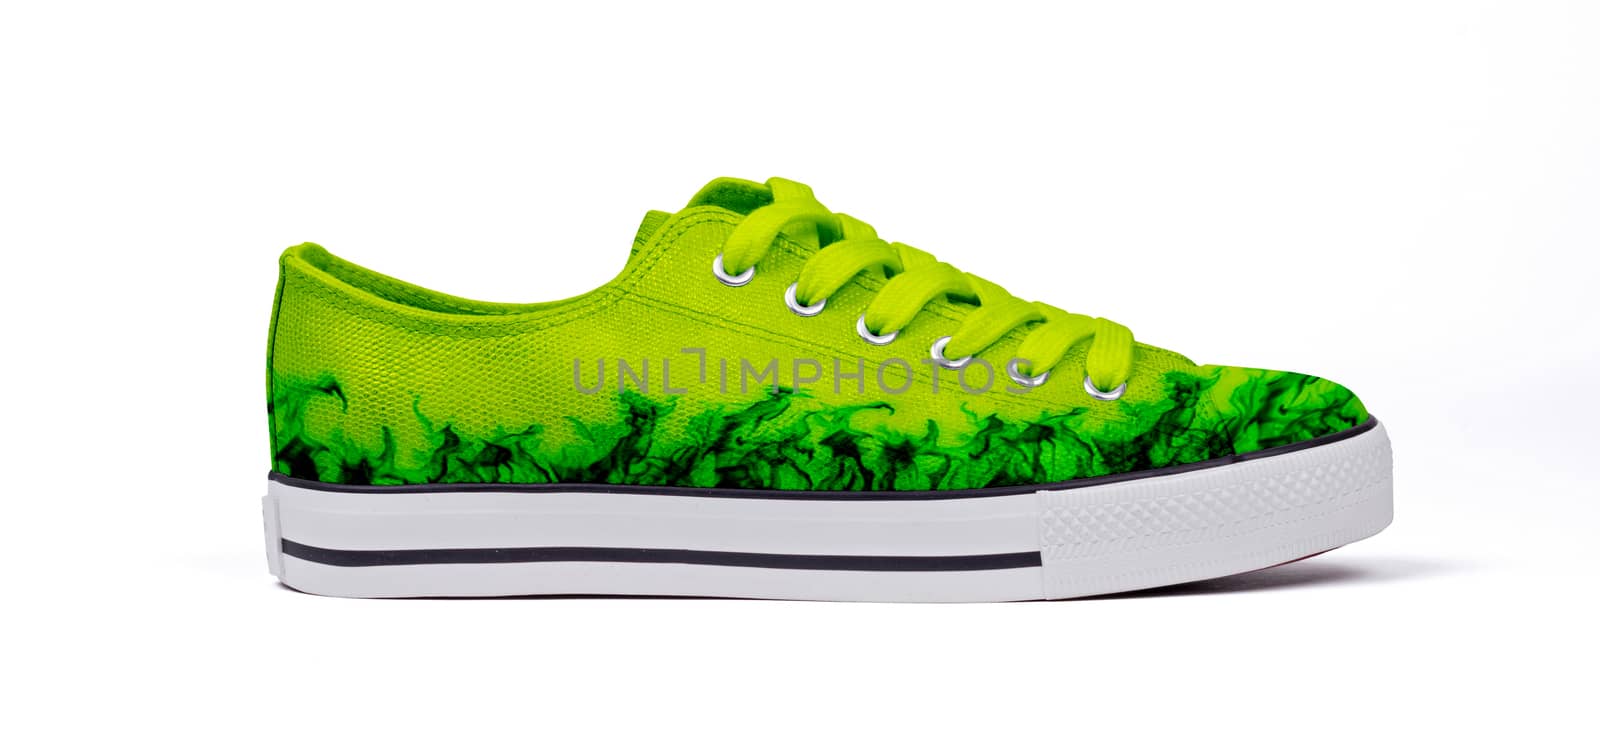 Shoe isolated on white background - Flames, green by michaklootwijk